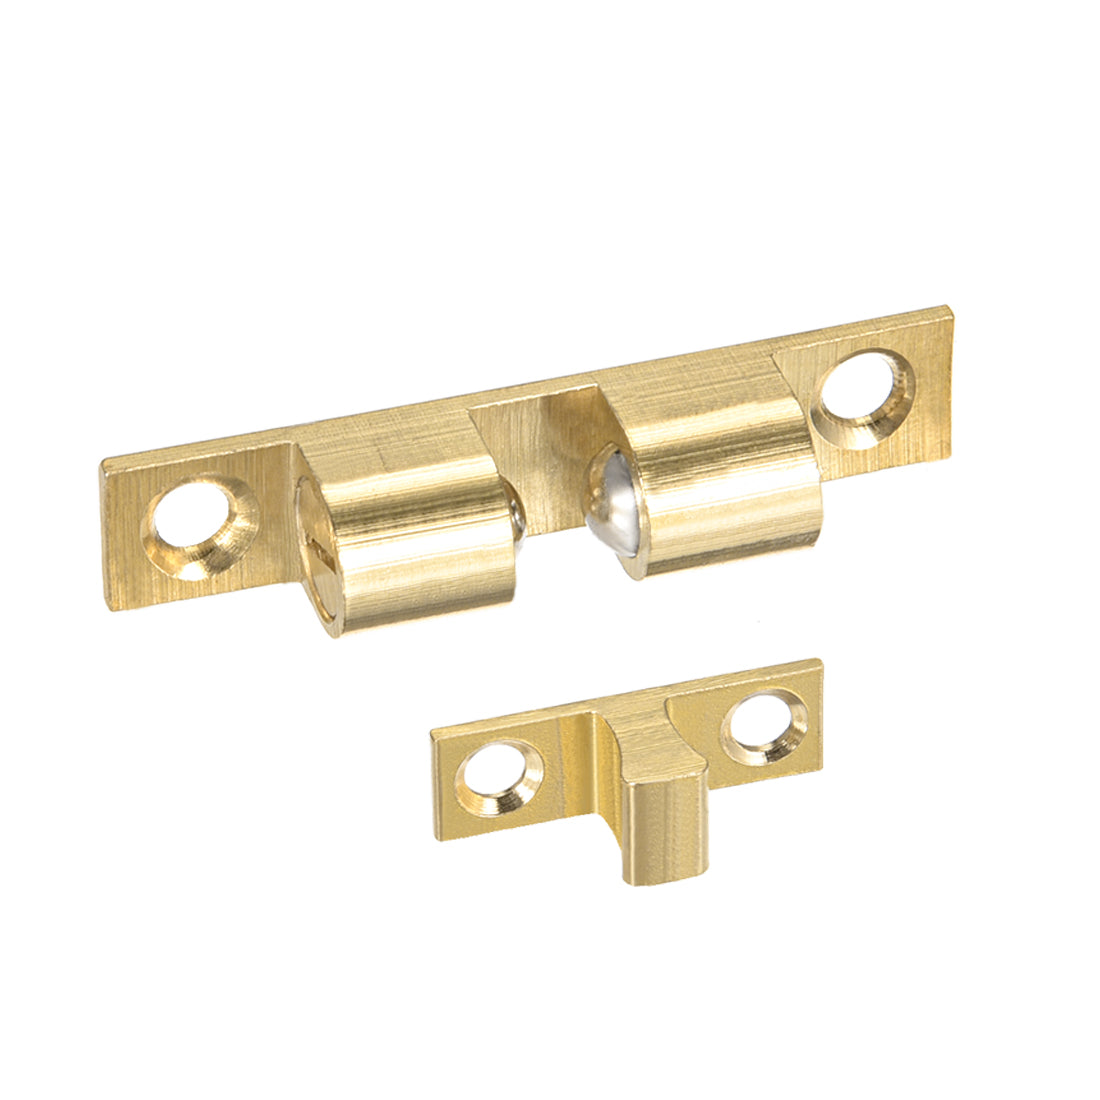 uxcell Uxcell Cabinet Door Closet Brass Double Ball Catch Tension Latch 50mm Length Gold Tone